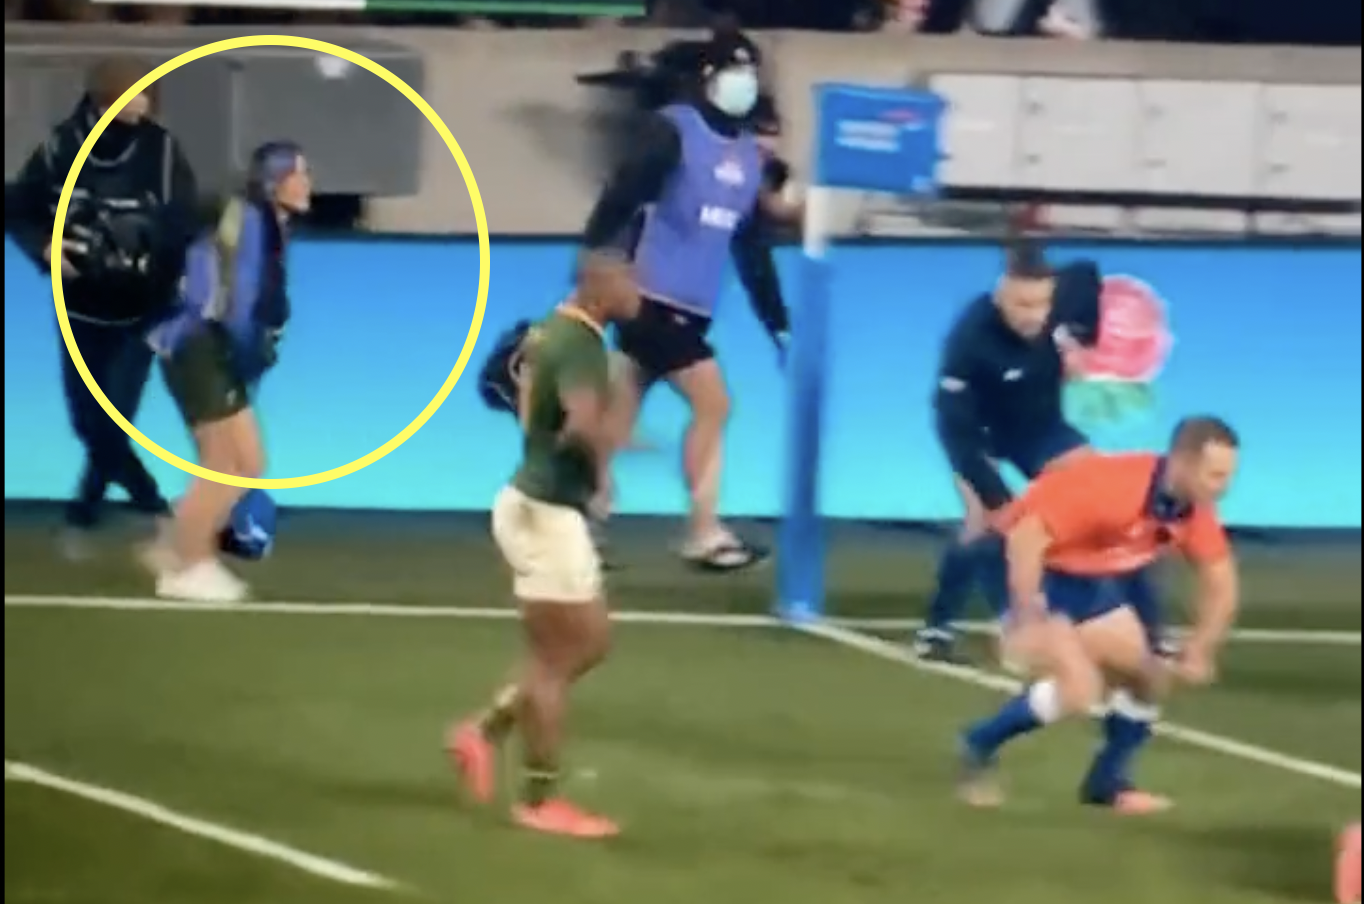 The clip that has caused a Twitter storm after England's win over Boks